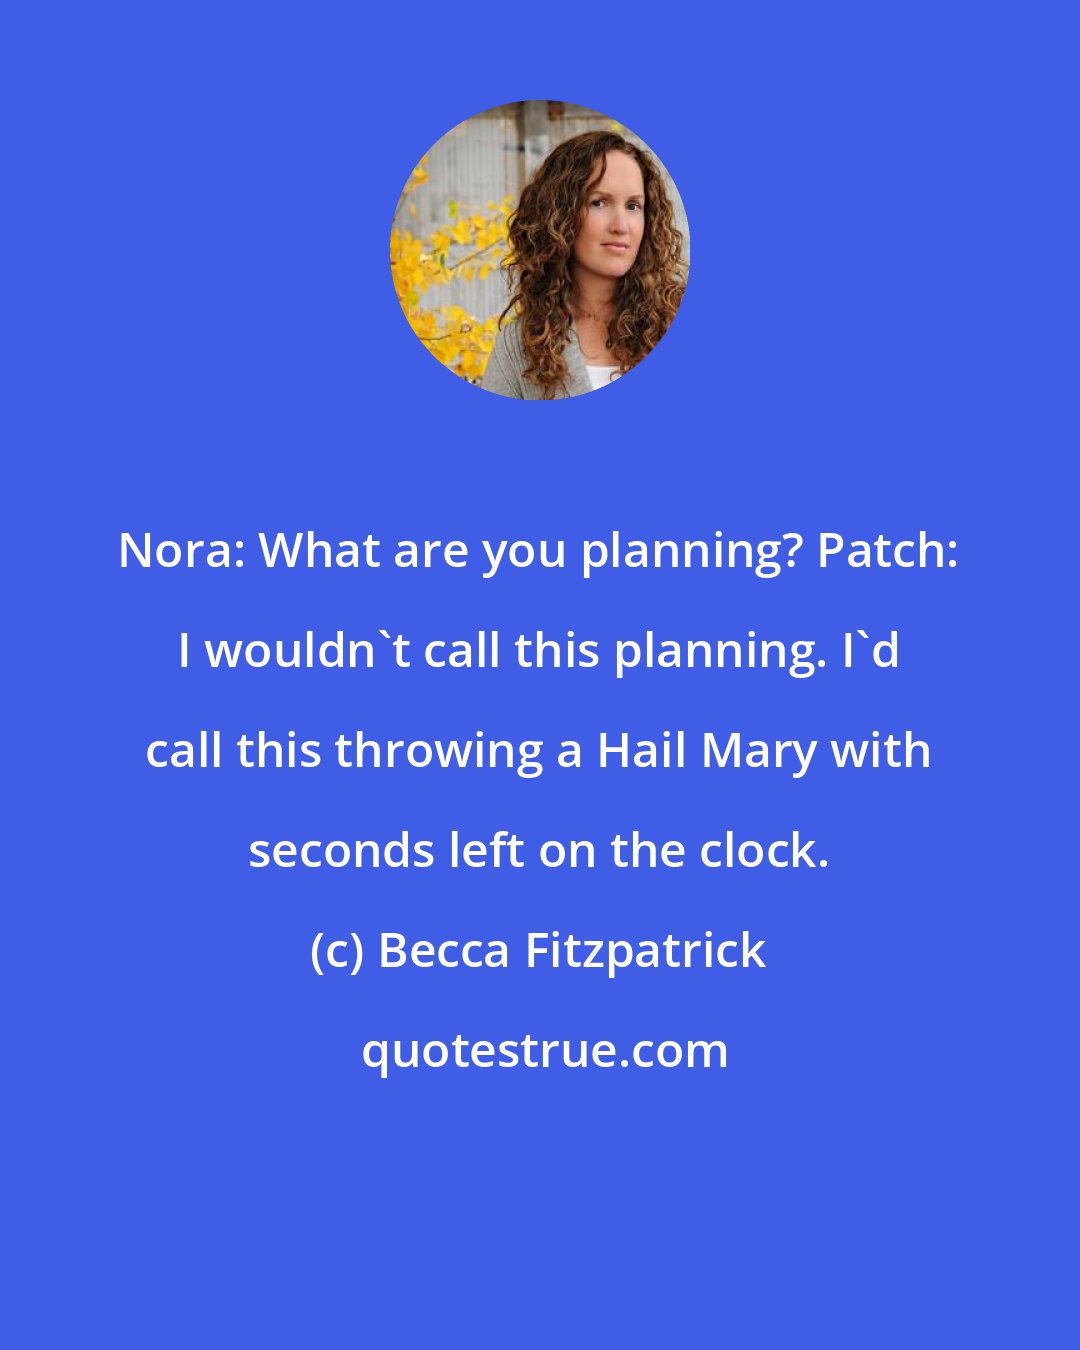 Becca Fitzpatrick: Nora: What are you planning? Patch: I wouldn't call this planning. I'd call this throwing a Hail Mary with seconds left on the clock.